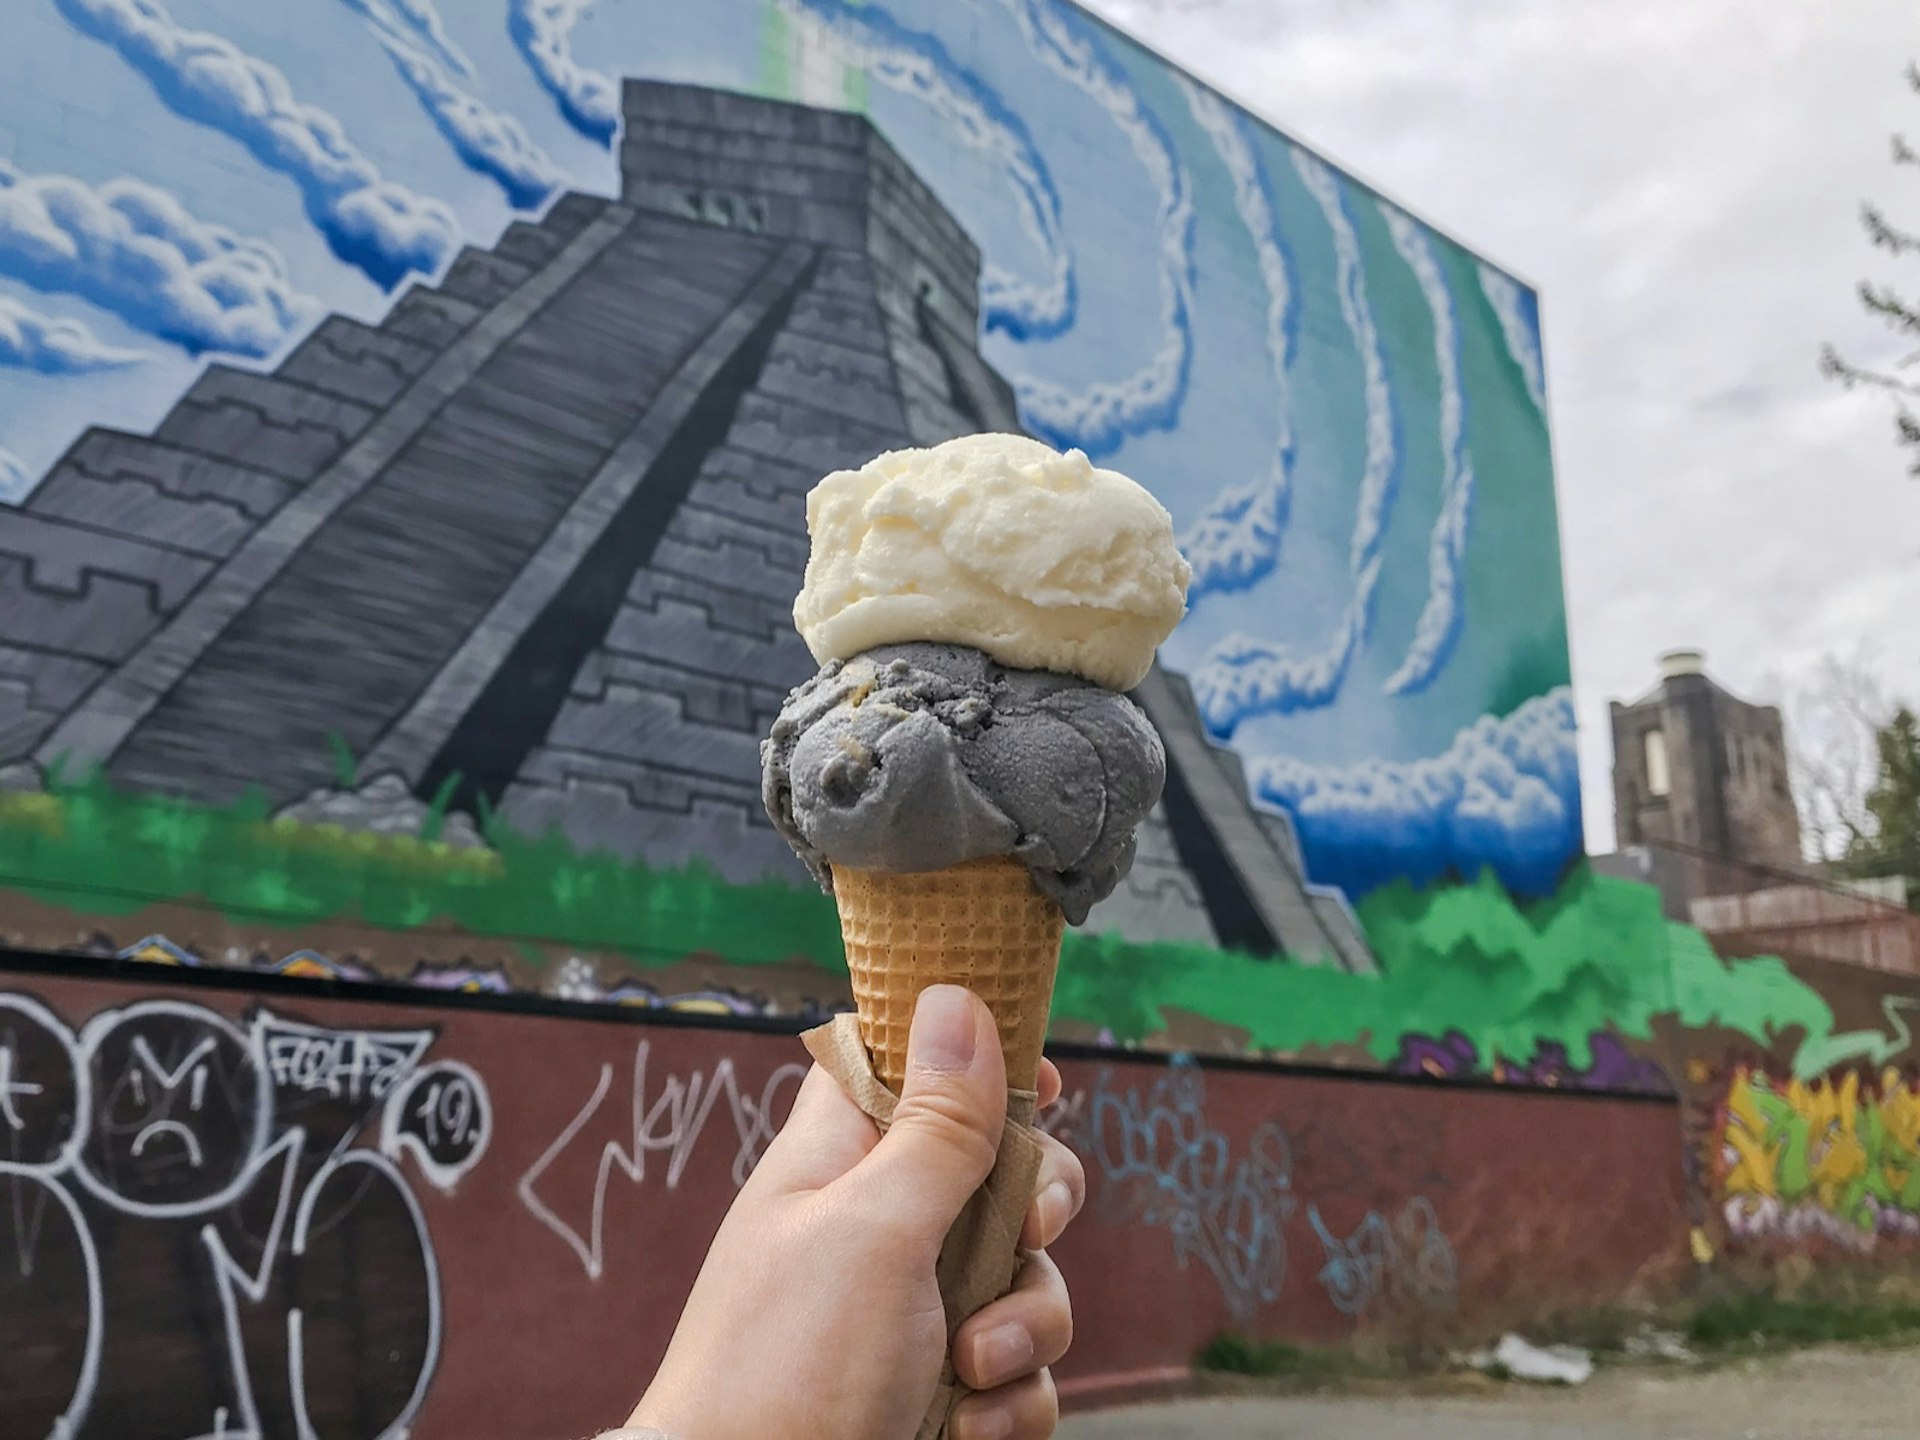 A hand holds two scoops of ice cream on a cone in front of a mural depicting a Mexican pyramid